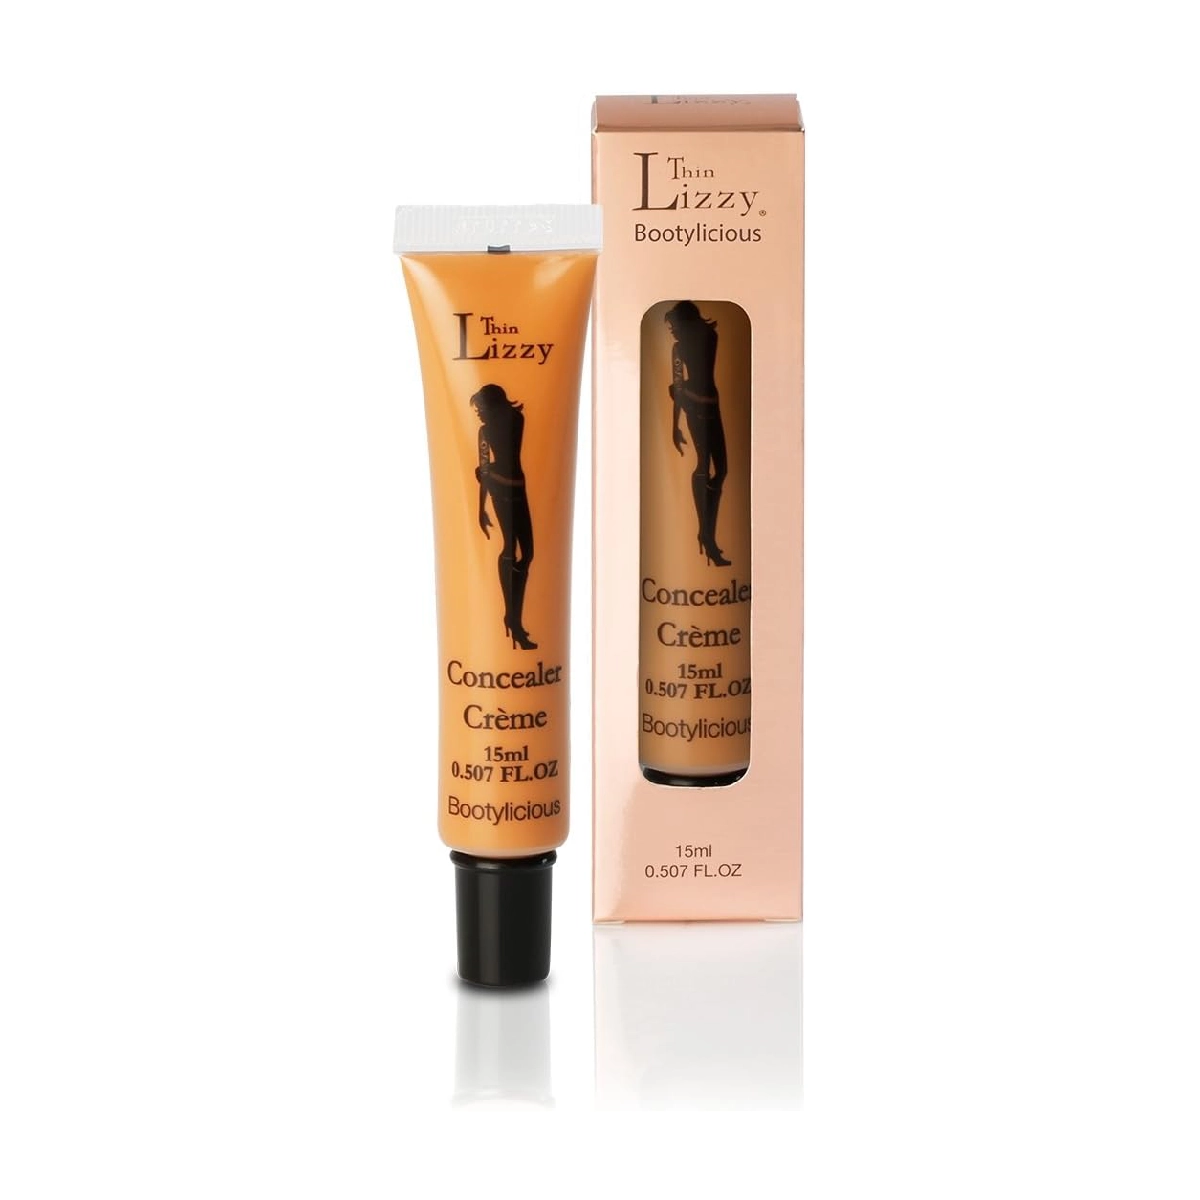 Thin Lizzy Concealer Creme - Miracle Makeup That Covers It All